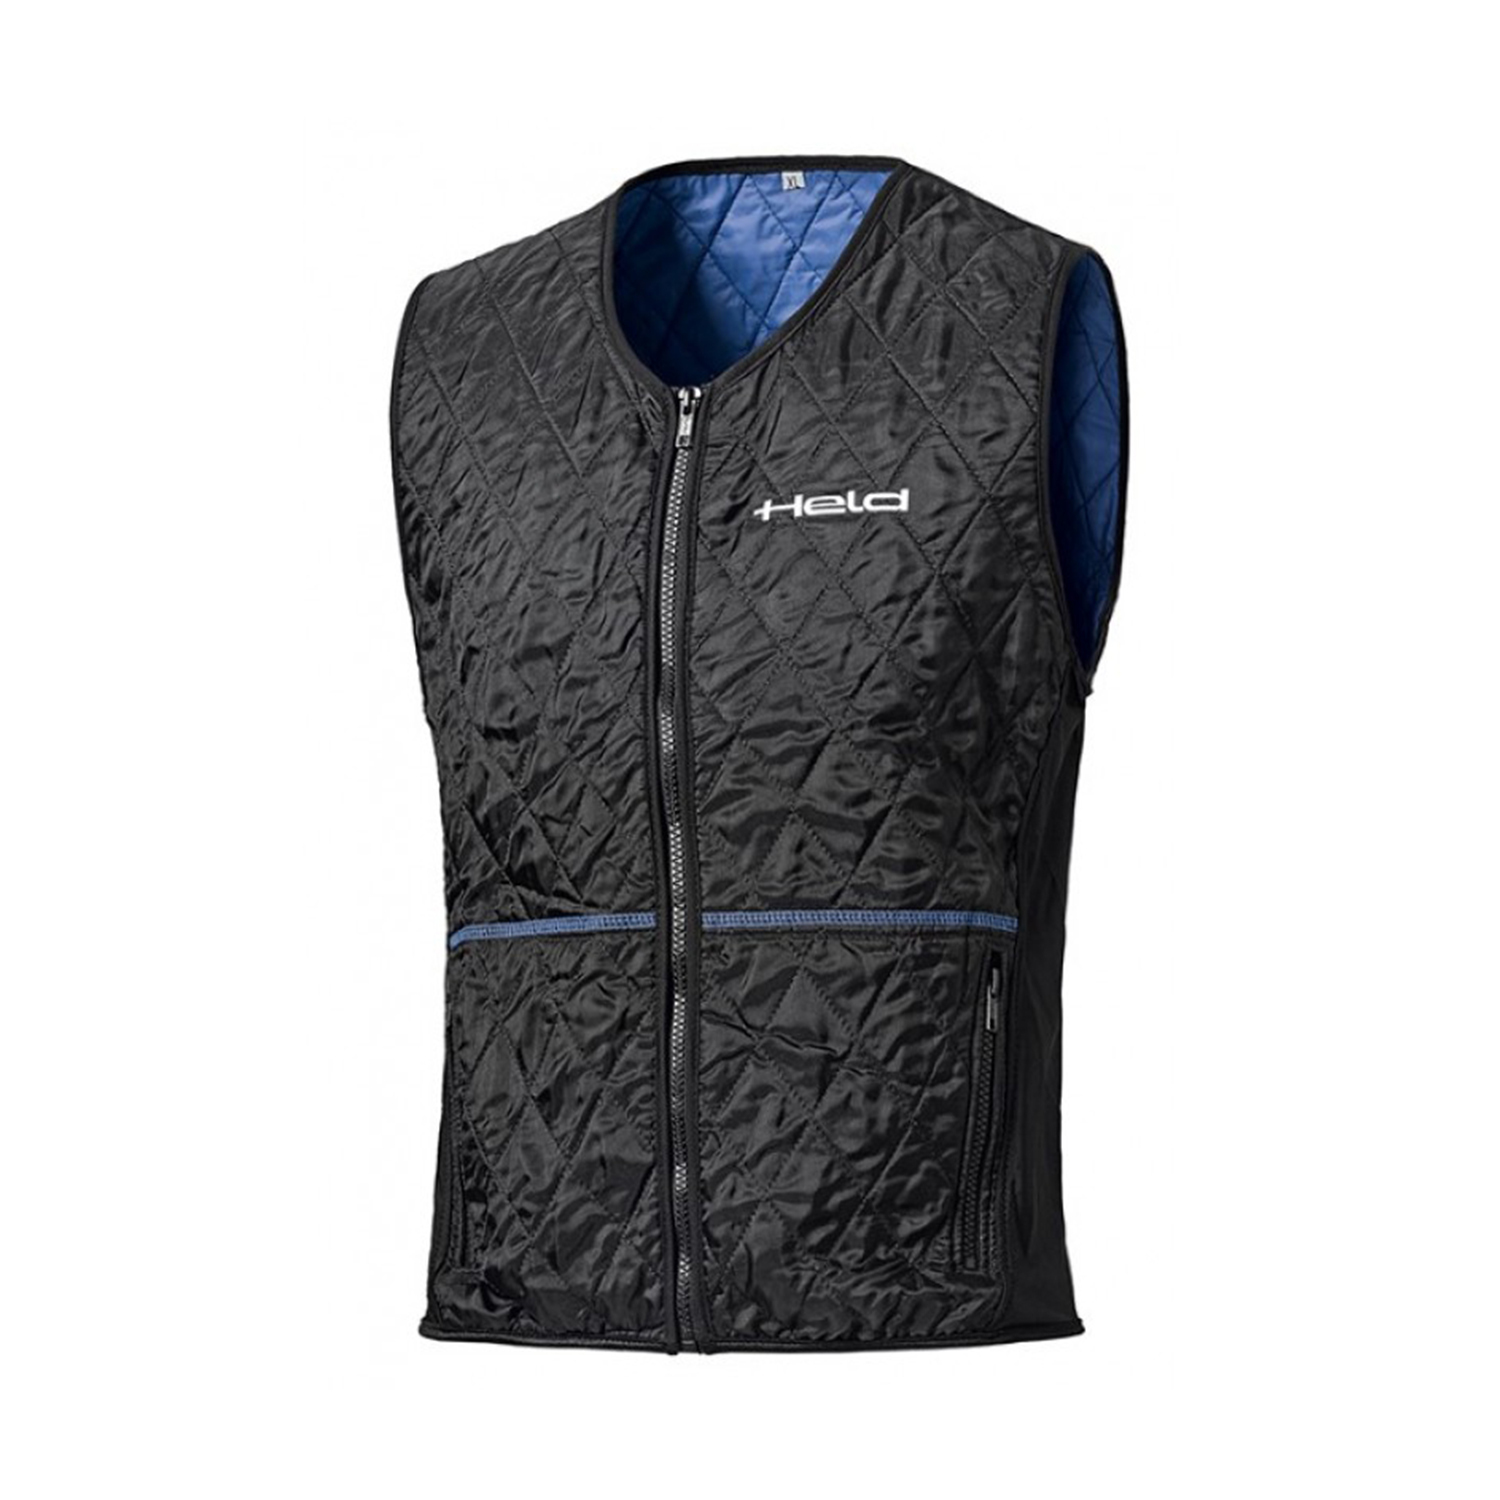 Held Cooling Vest - Available in Various Sizes